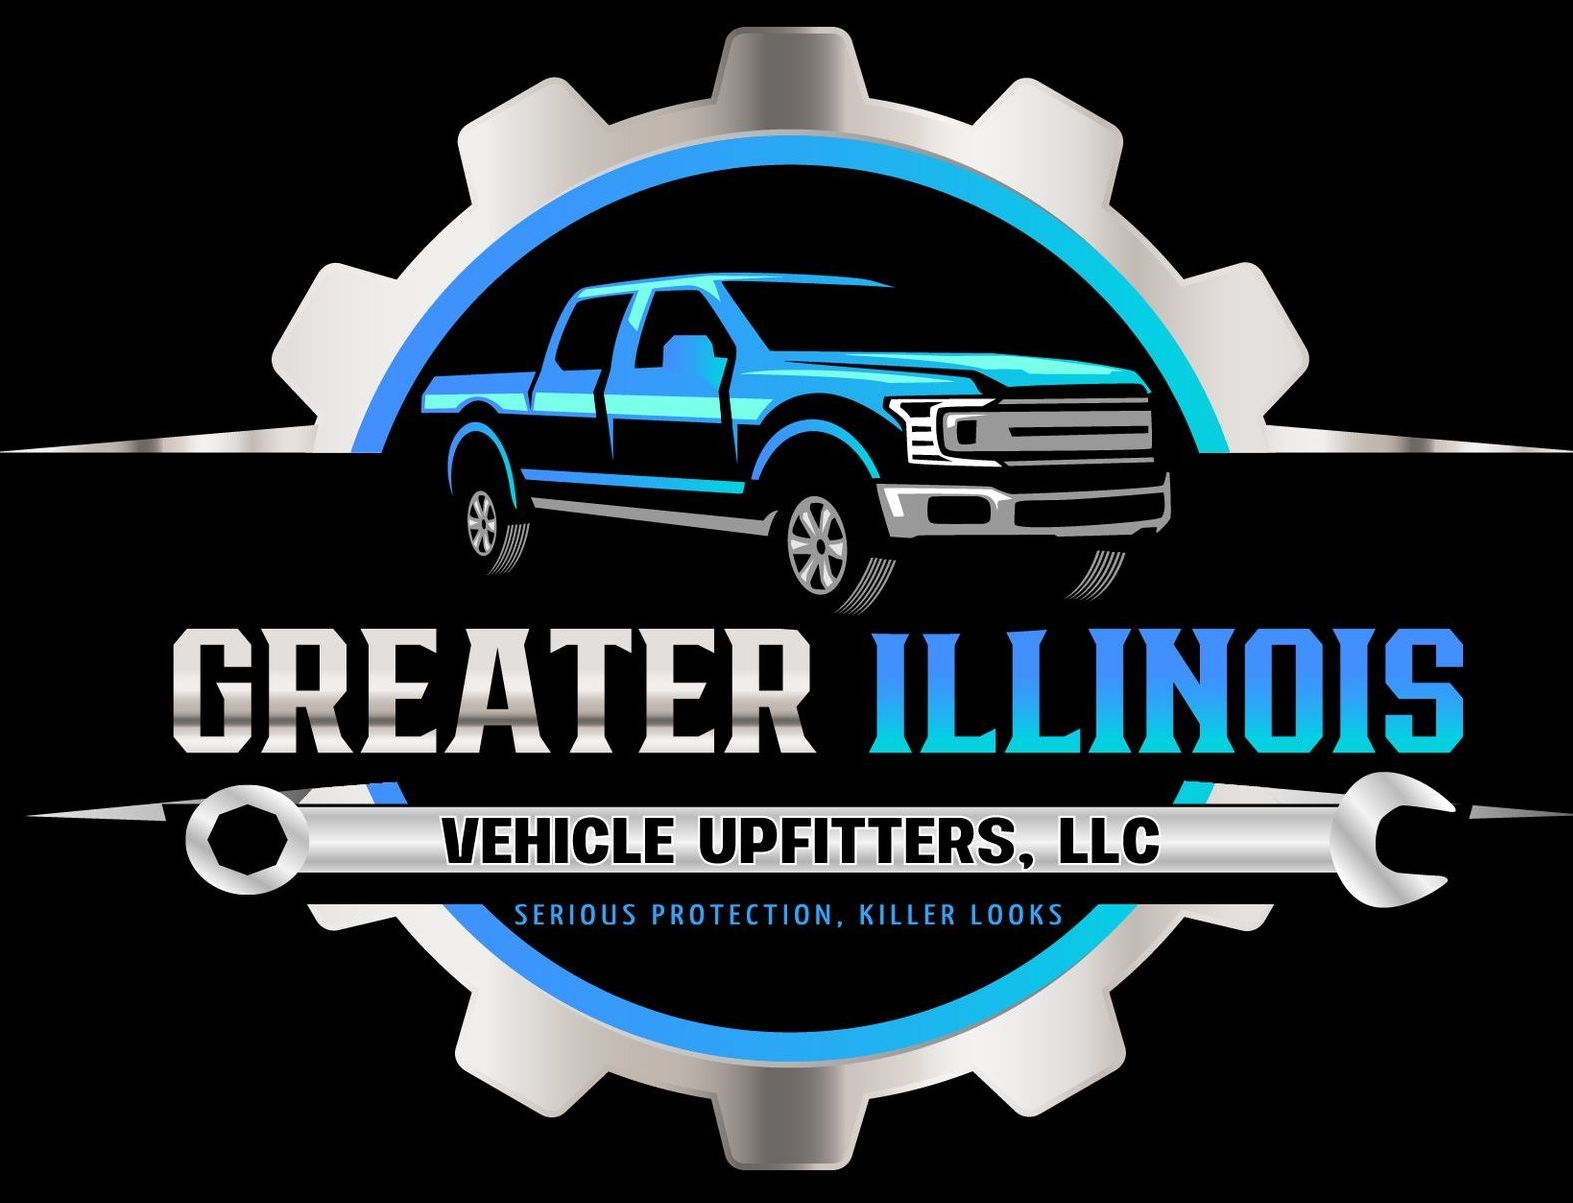 Line-X of Greater Illinois logo